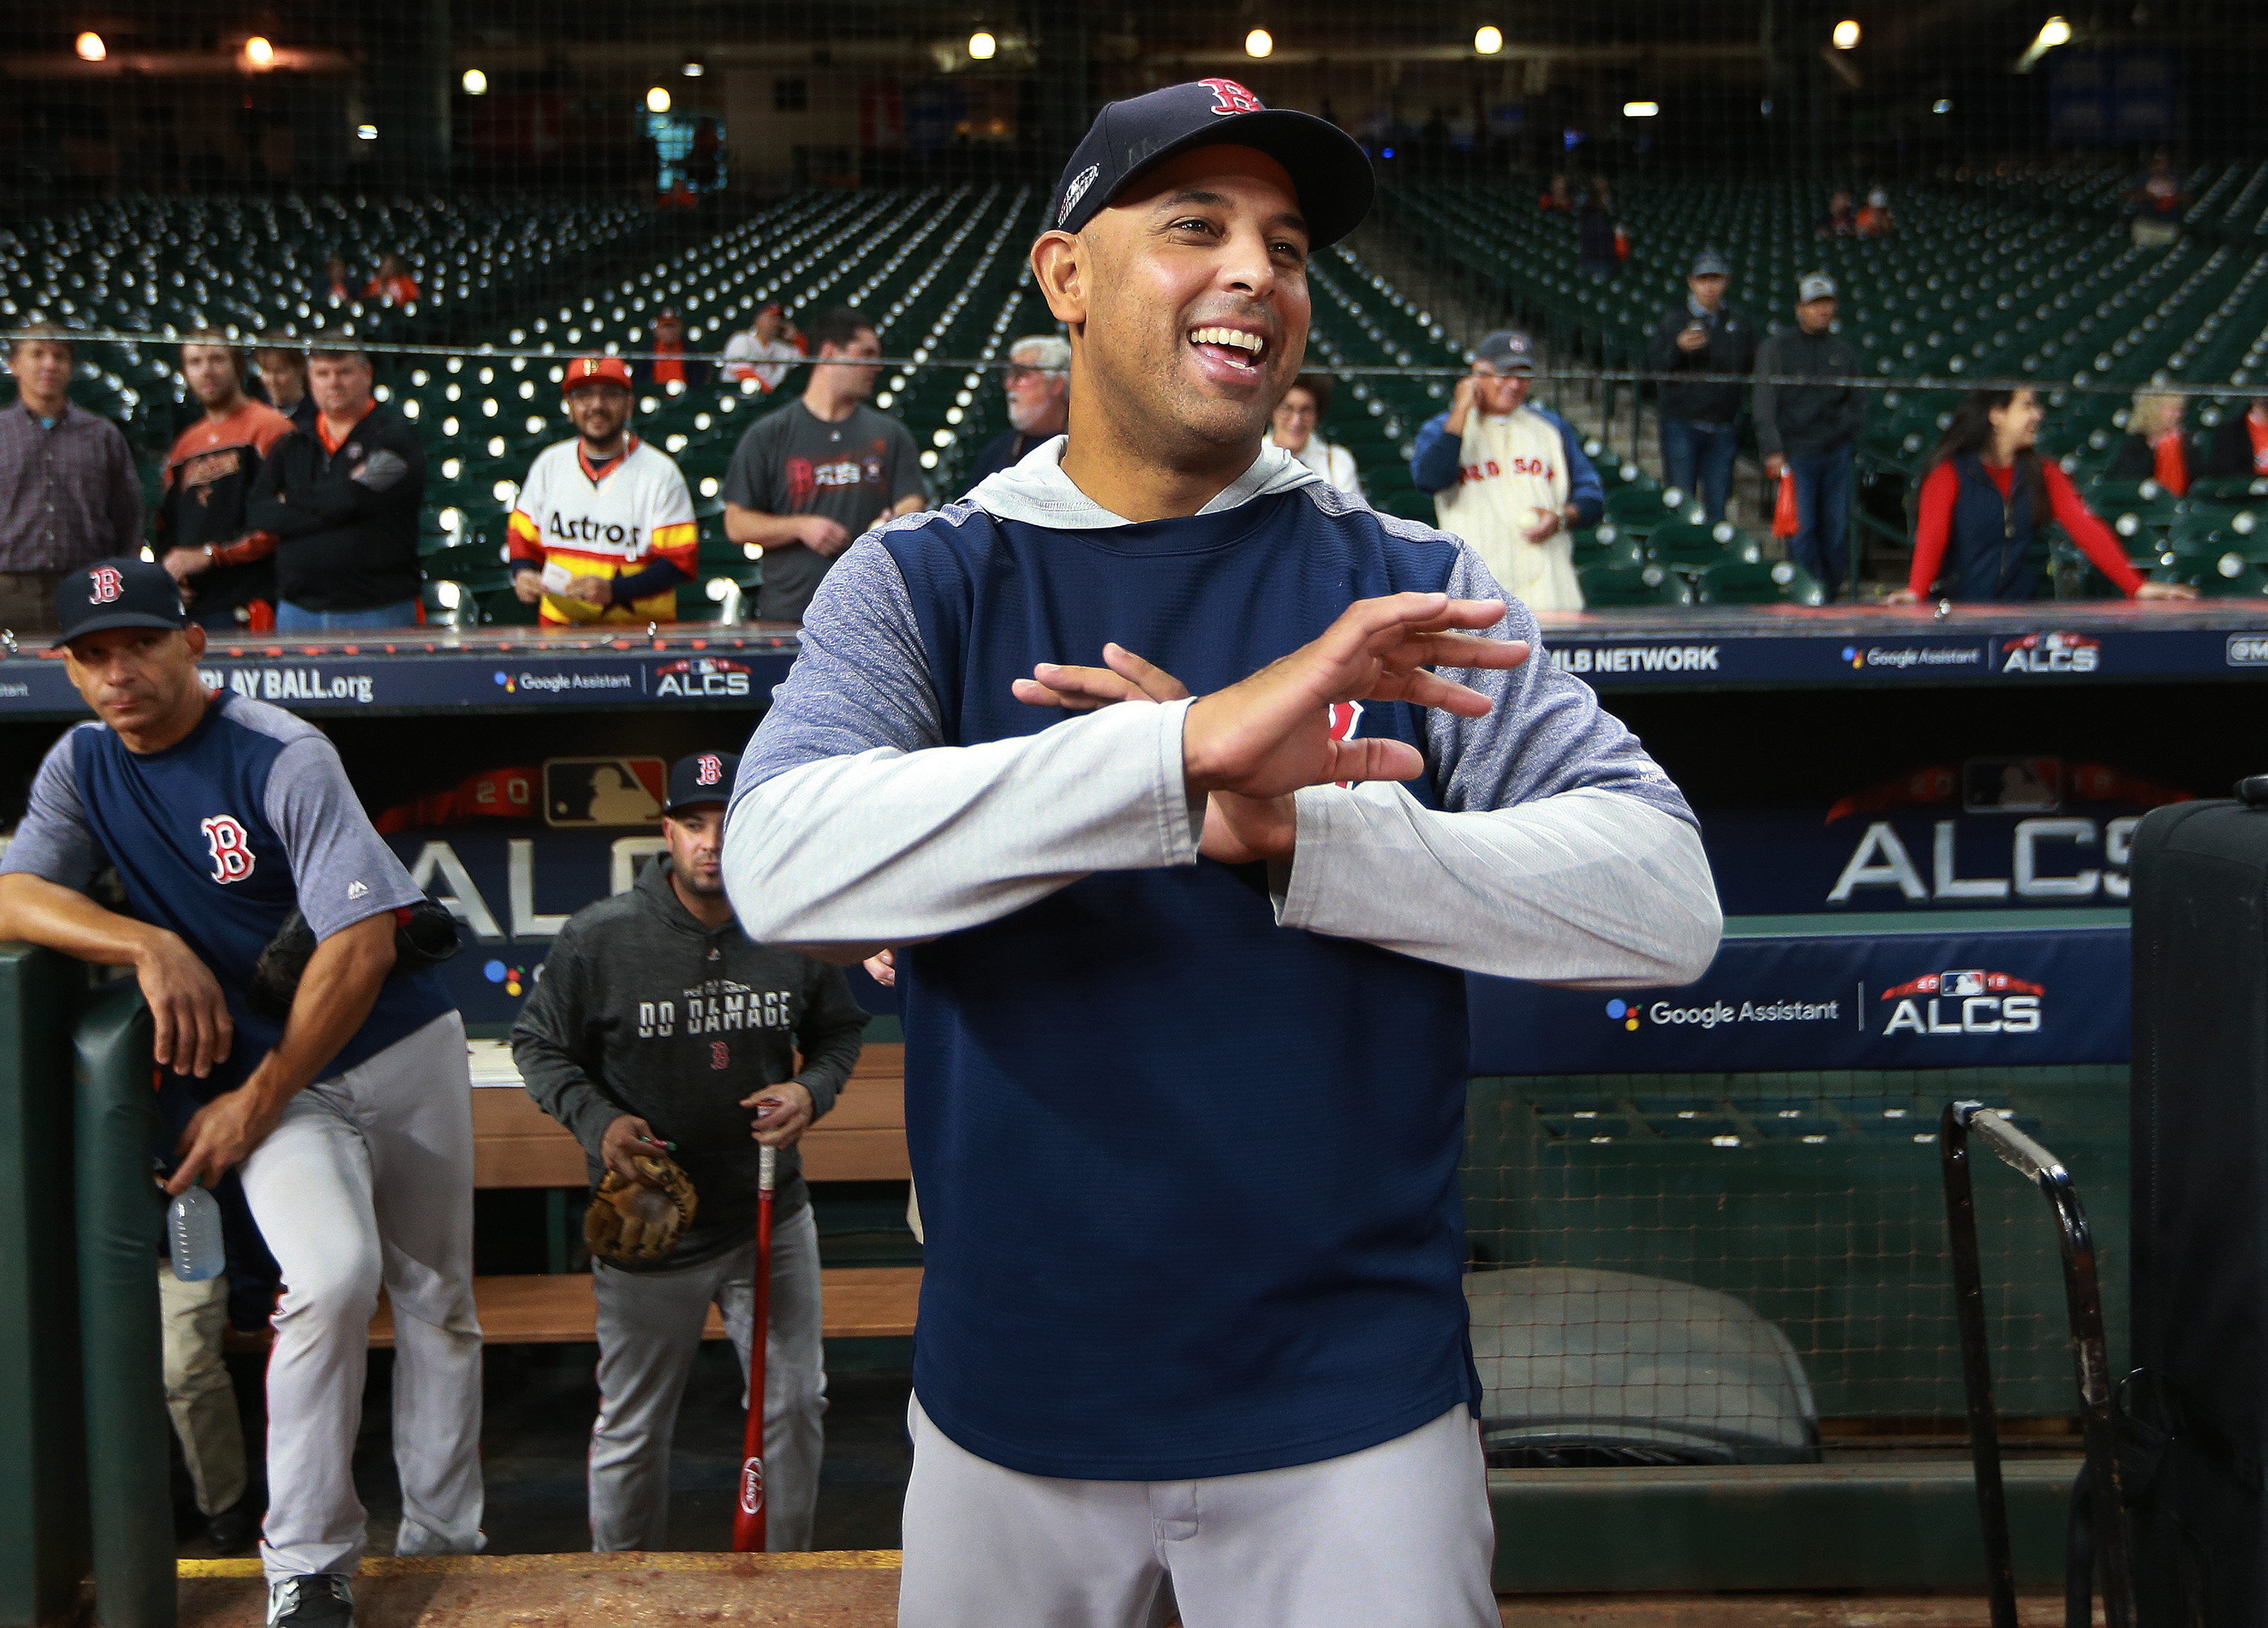 Alex Cora bragged about Astros' sign-stealing to Red Sox